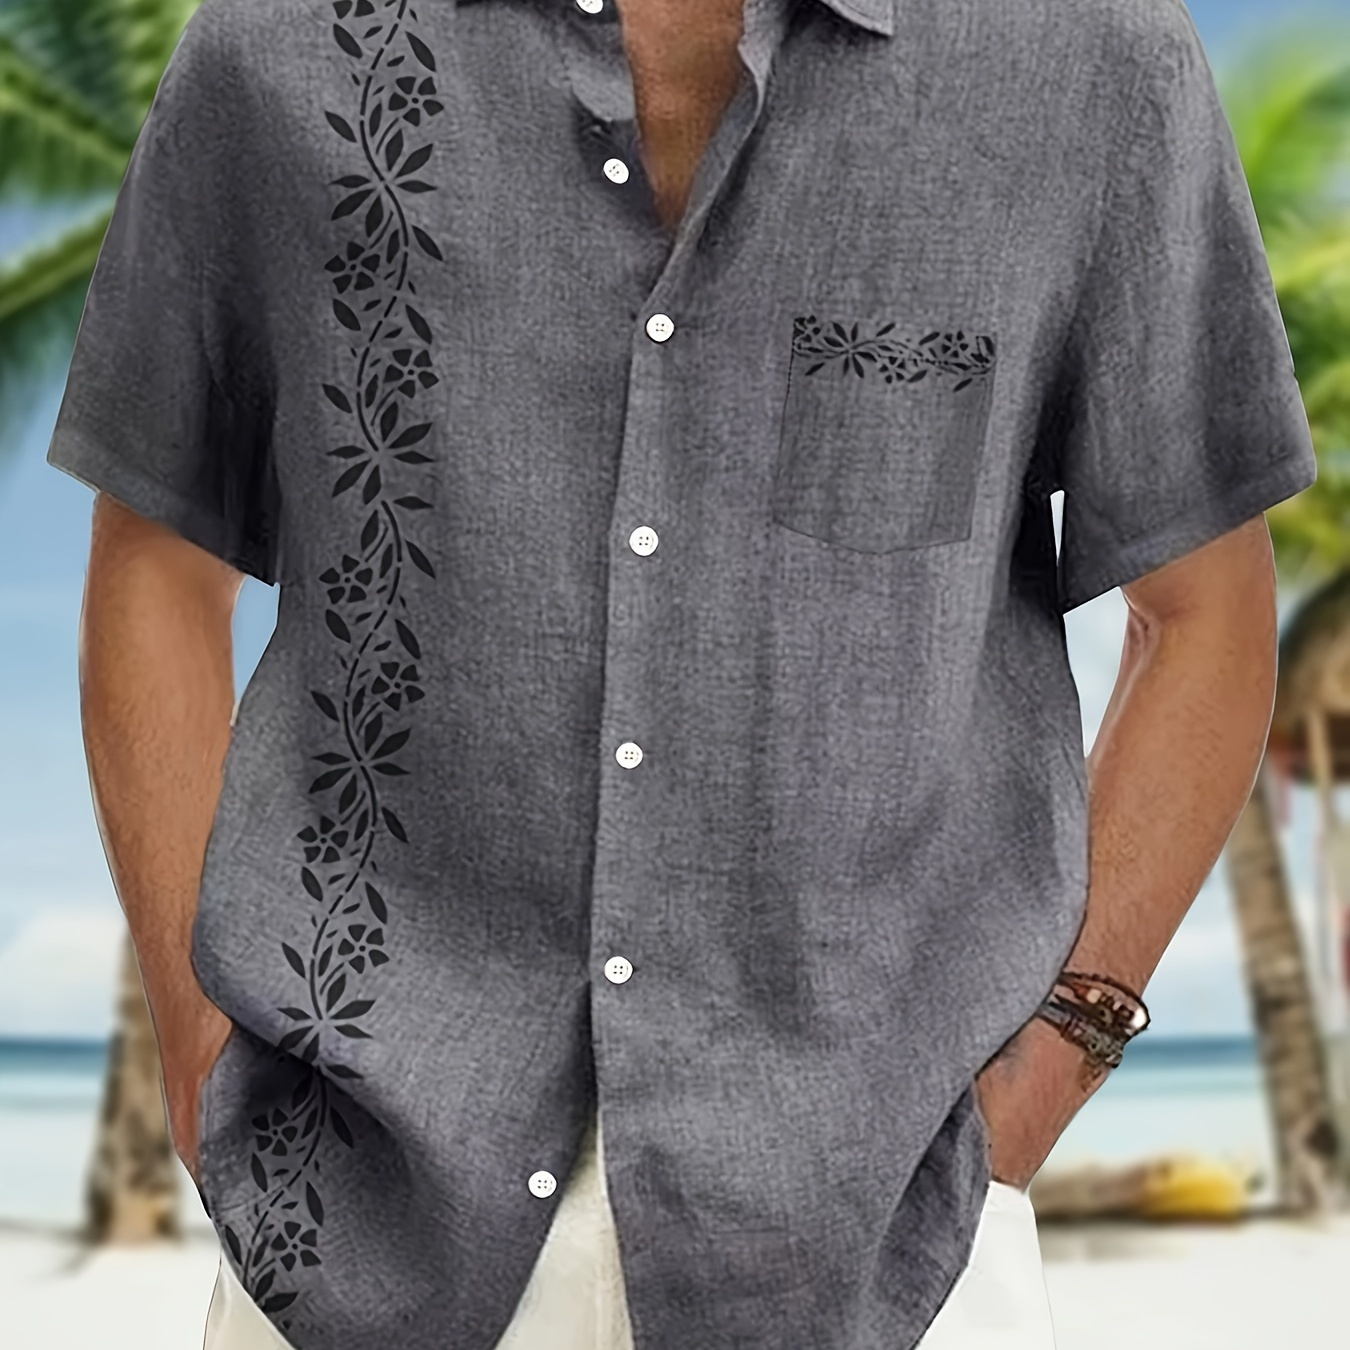 

Men's Trendy Hawaiian Lapel Collar Graphic Shirt With Stylish Leaf Pattern Print, Versatile For Summer Vacation And Casual Wear